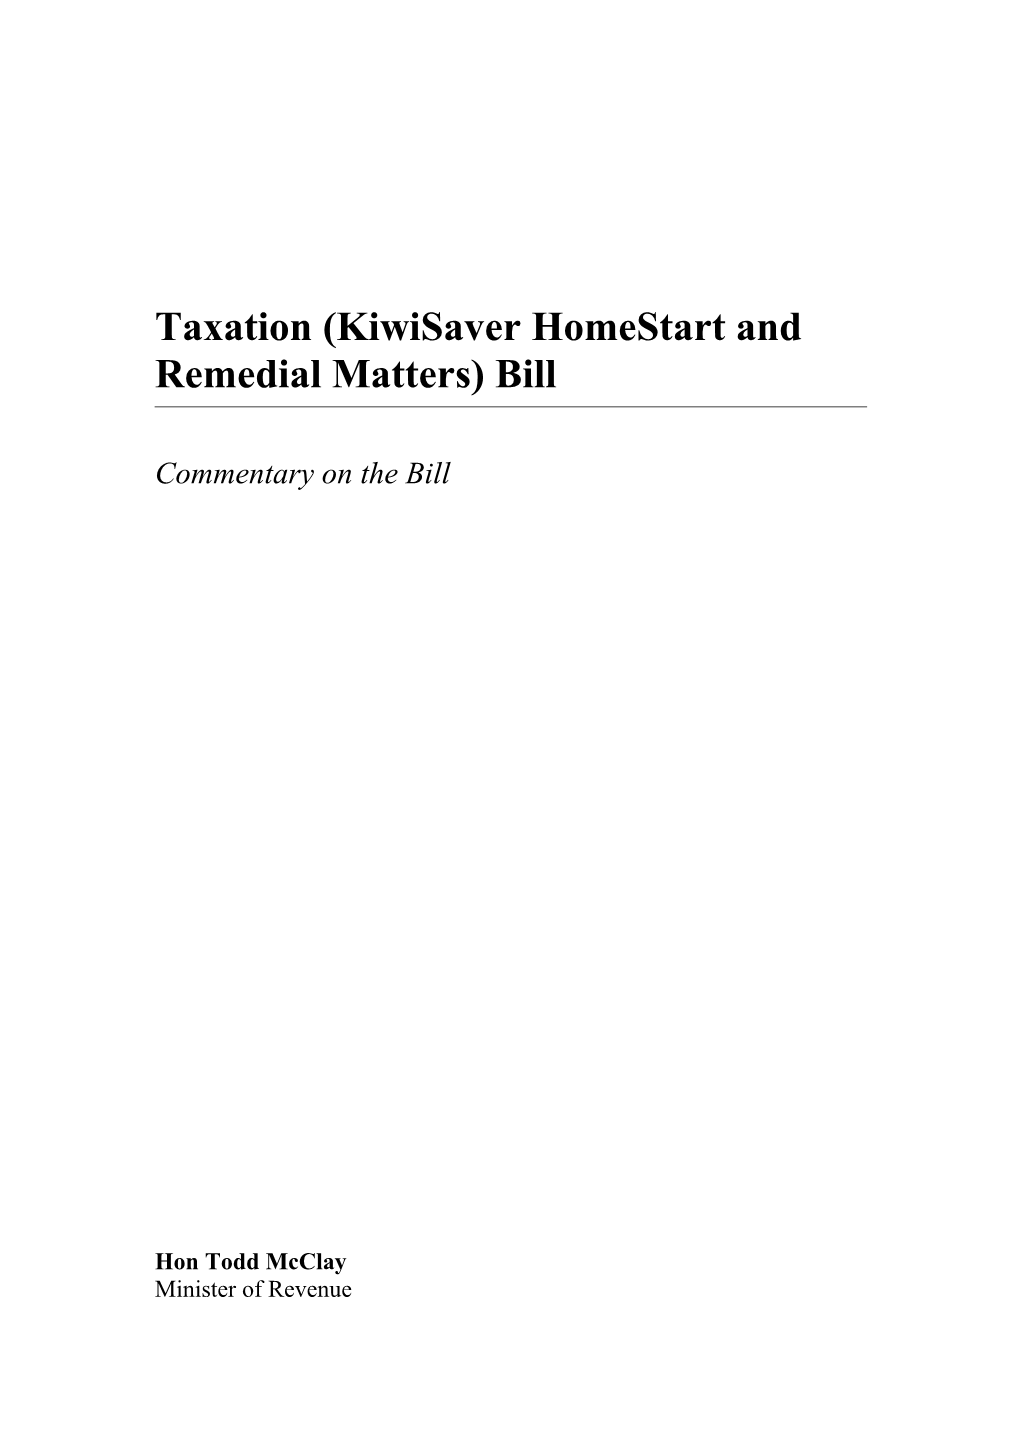 Taxation (Kiwisaver Homestart and Remedial Matters) Bill: Commentary on the Bill